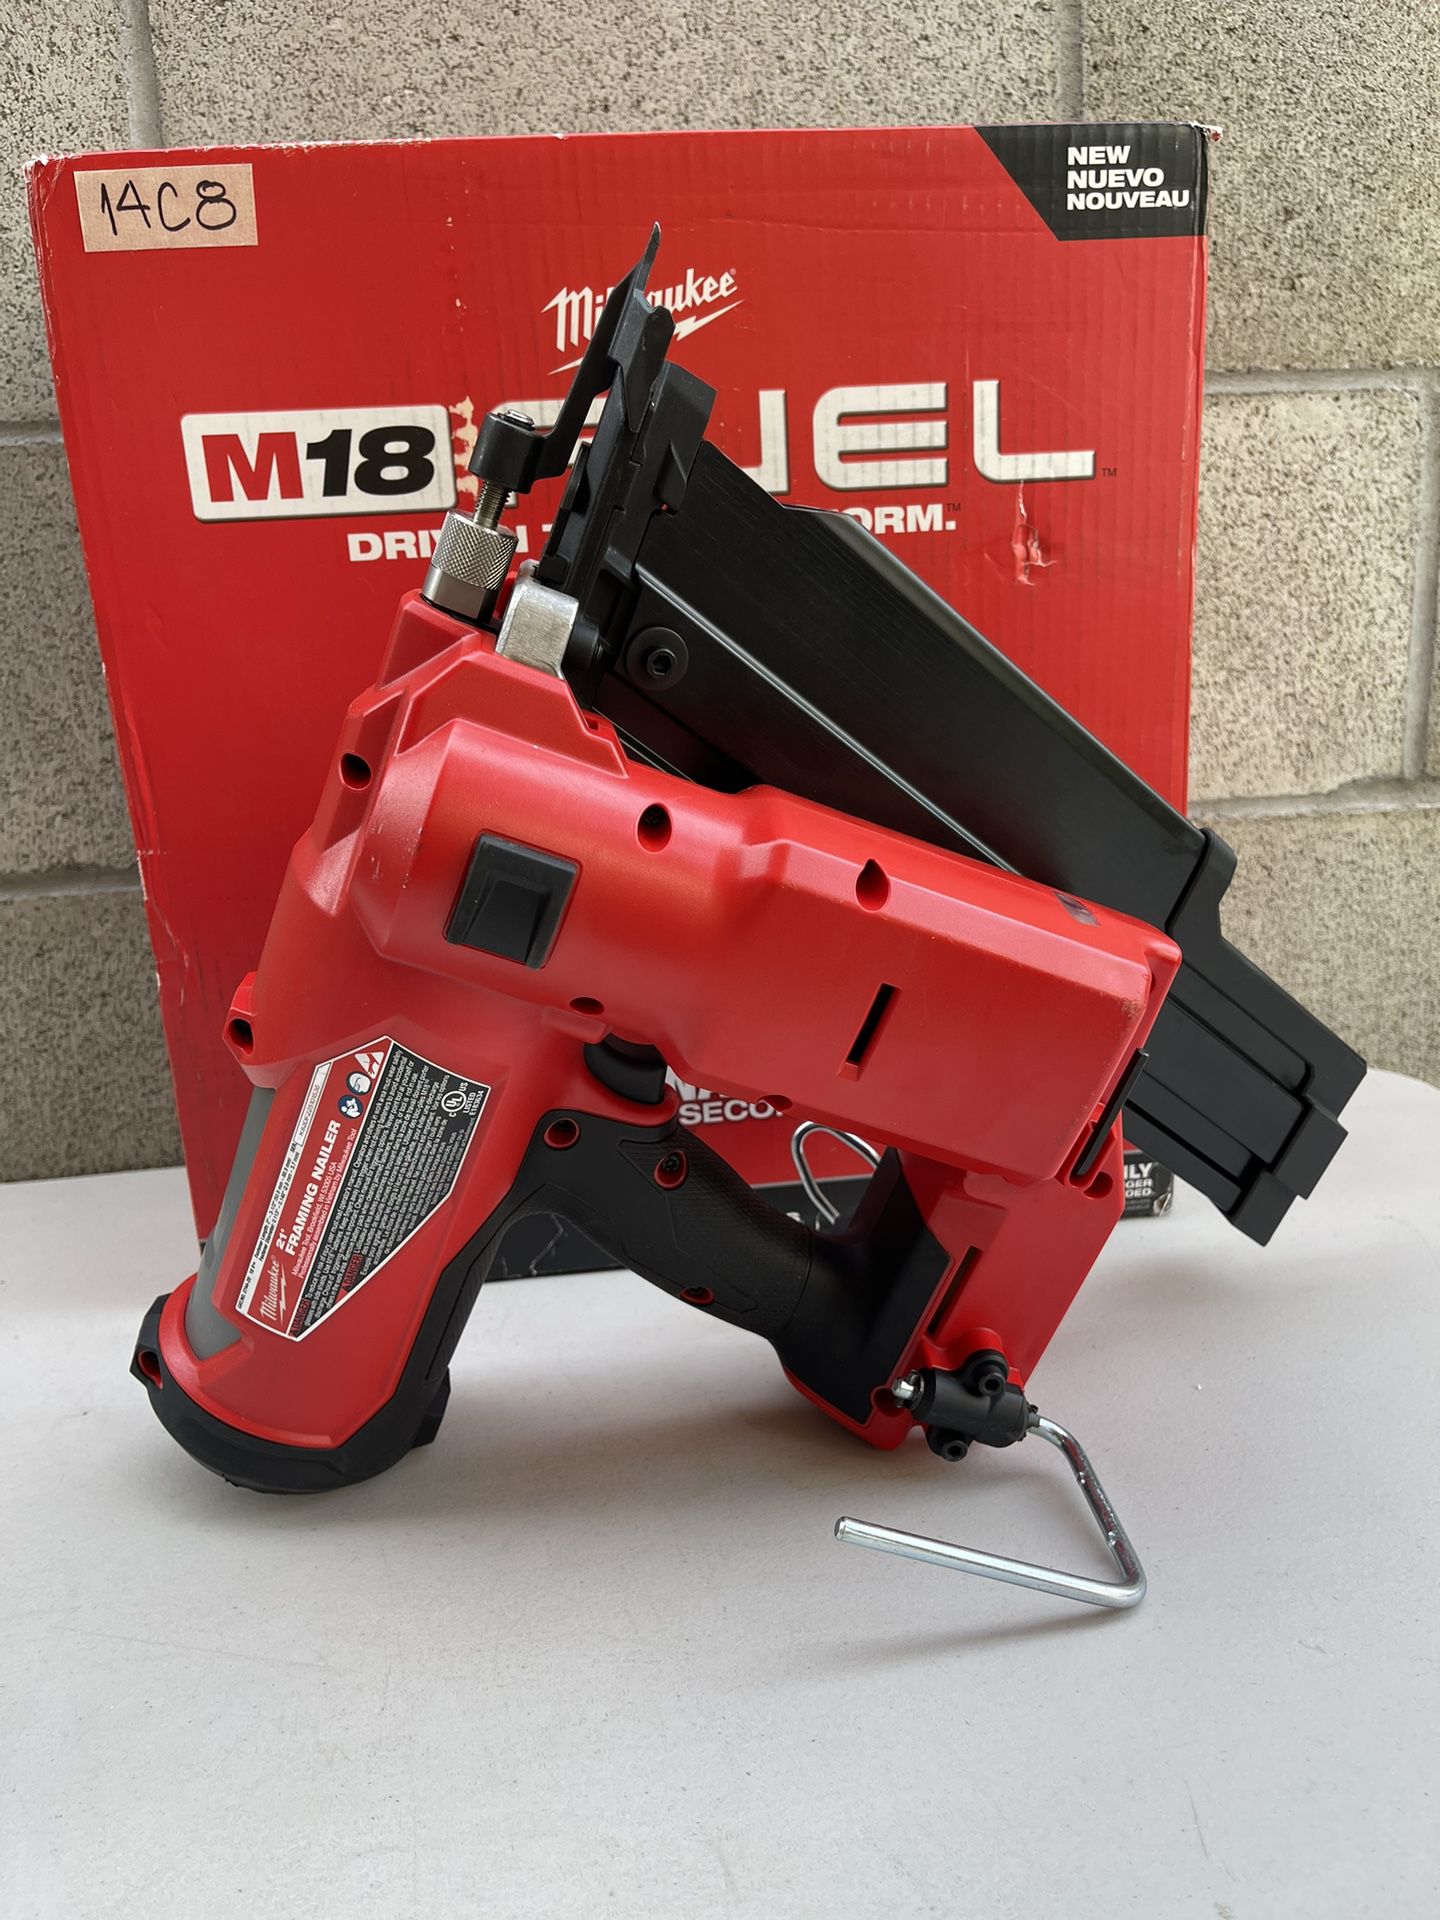 Milwaukee M18 FUEL 3-1/2 in. 18-Volt 21-Degree Framing Nailer (Tool-Only)